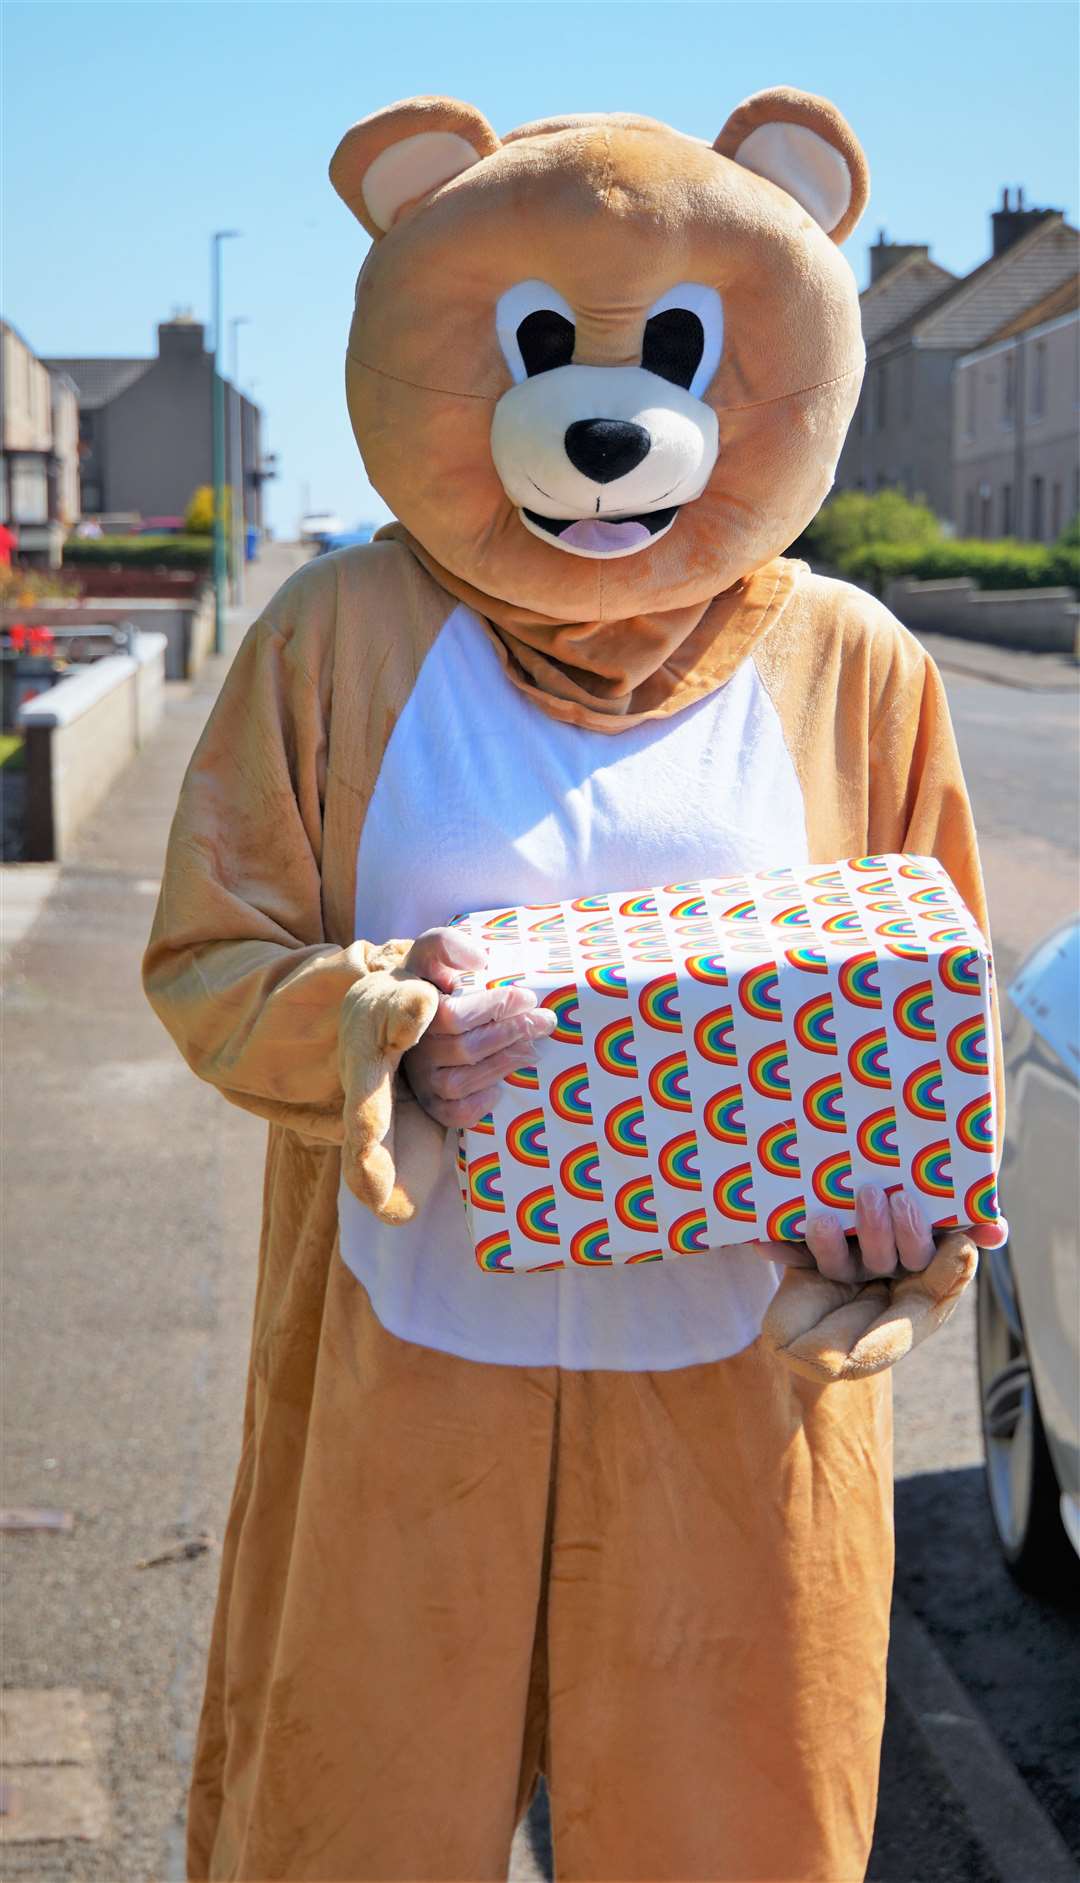 This teddy bear had a little 'inside help' from care worker Wendy McLeod for making a special delivery.